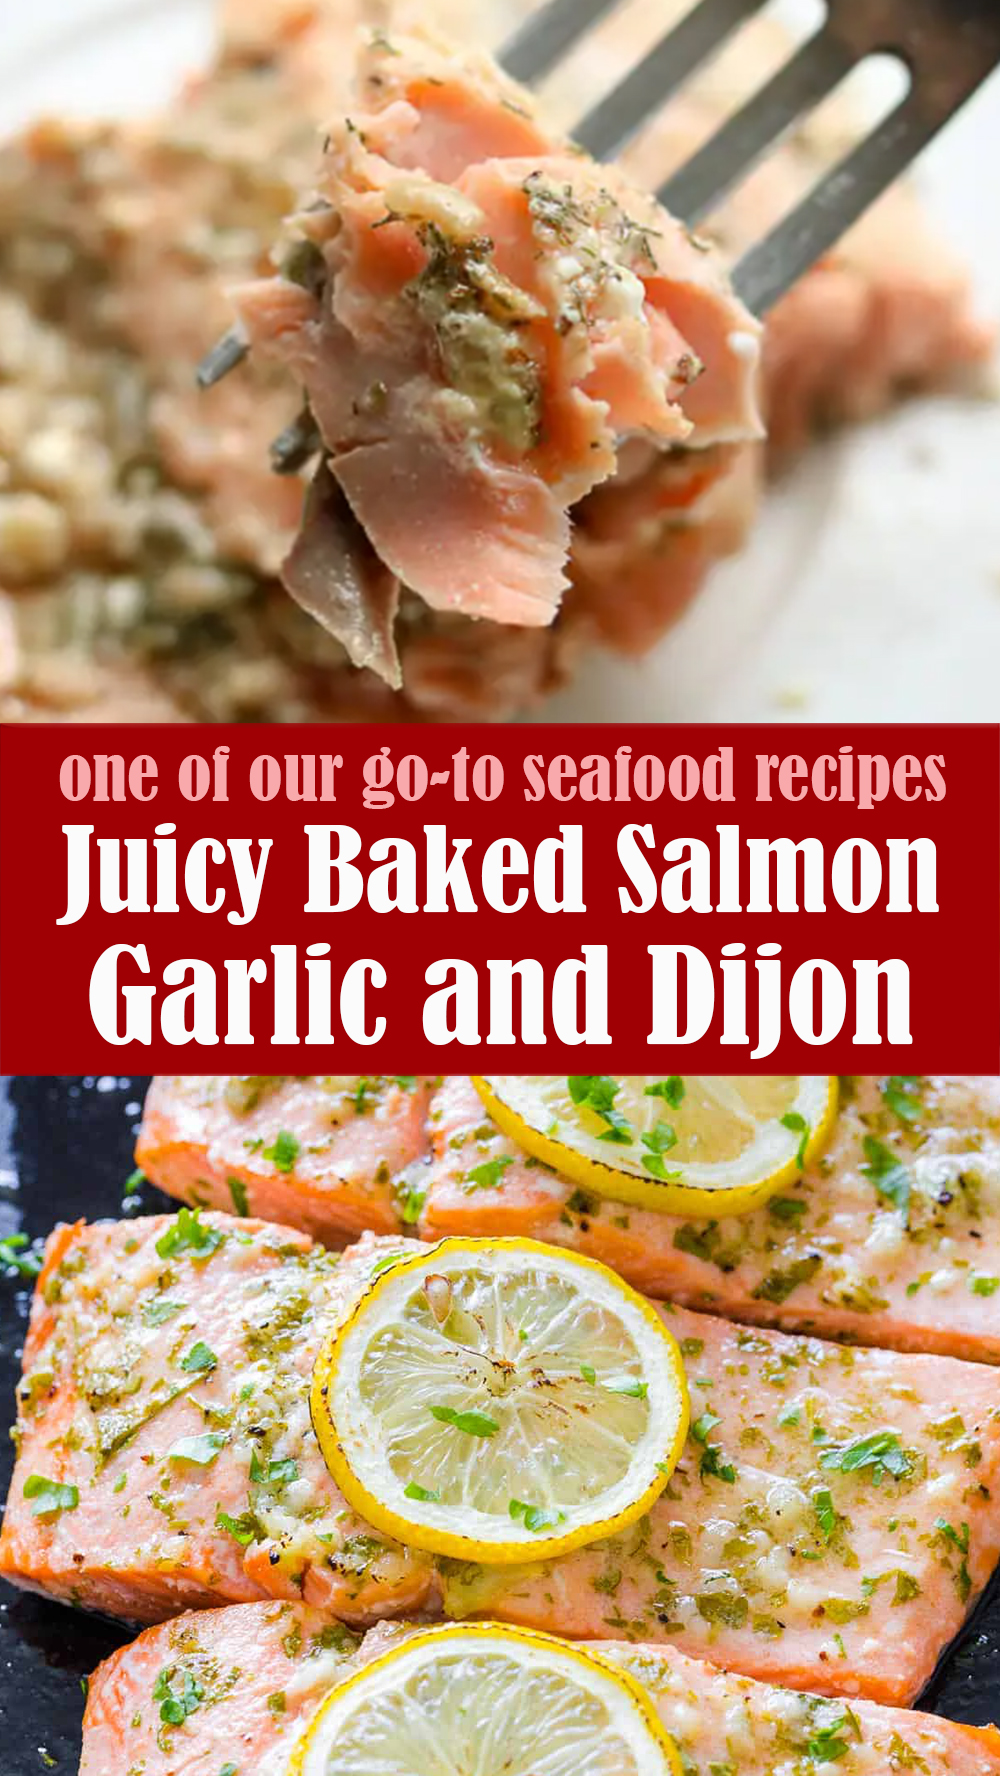 Juicy Baked Salmon with Garlic and Dijon